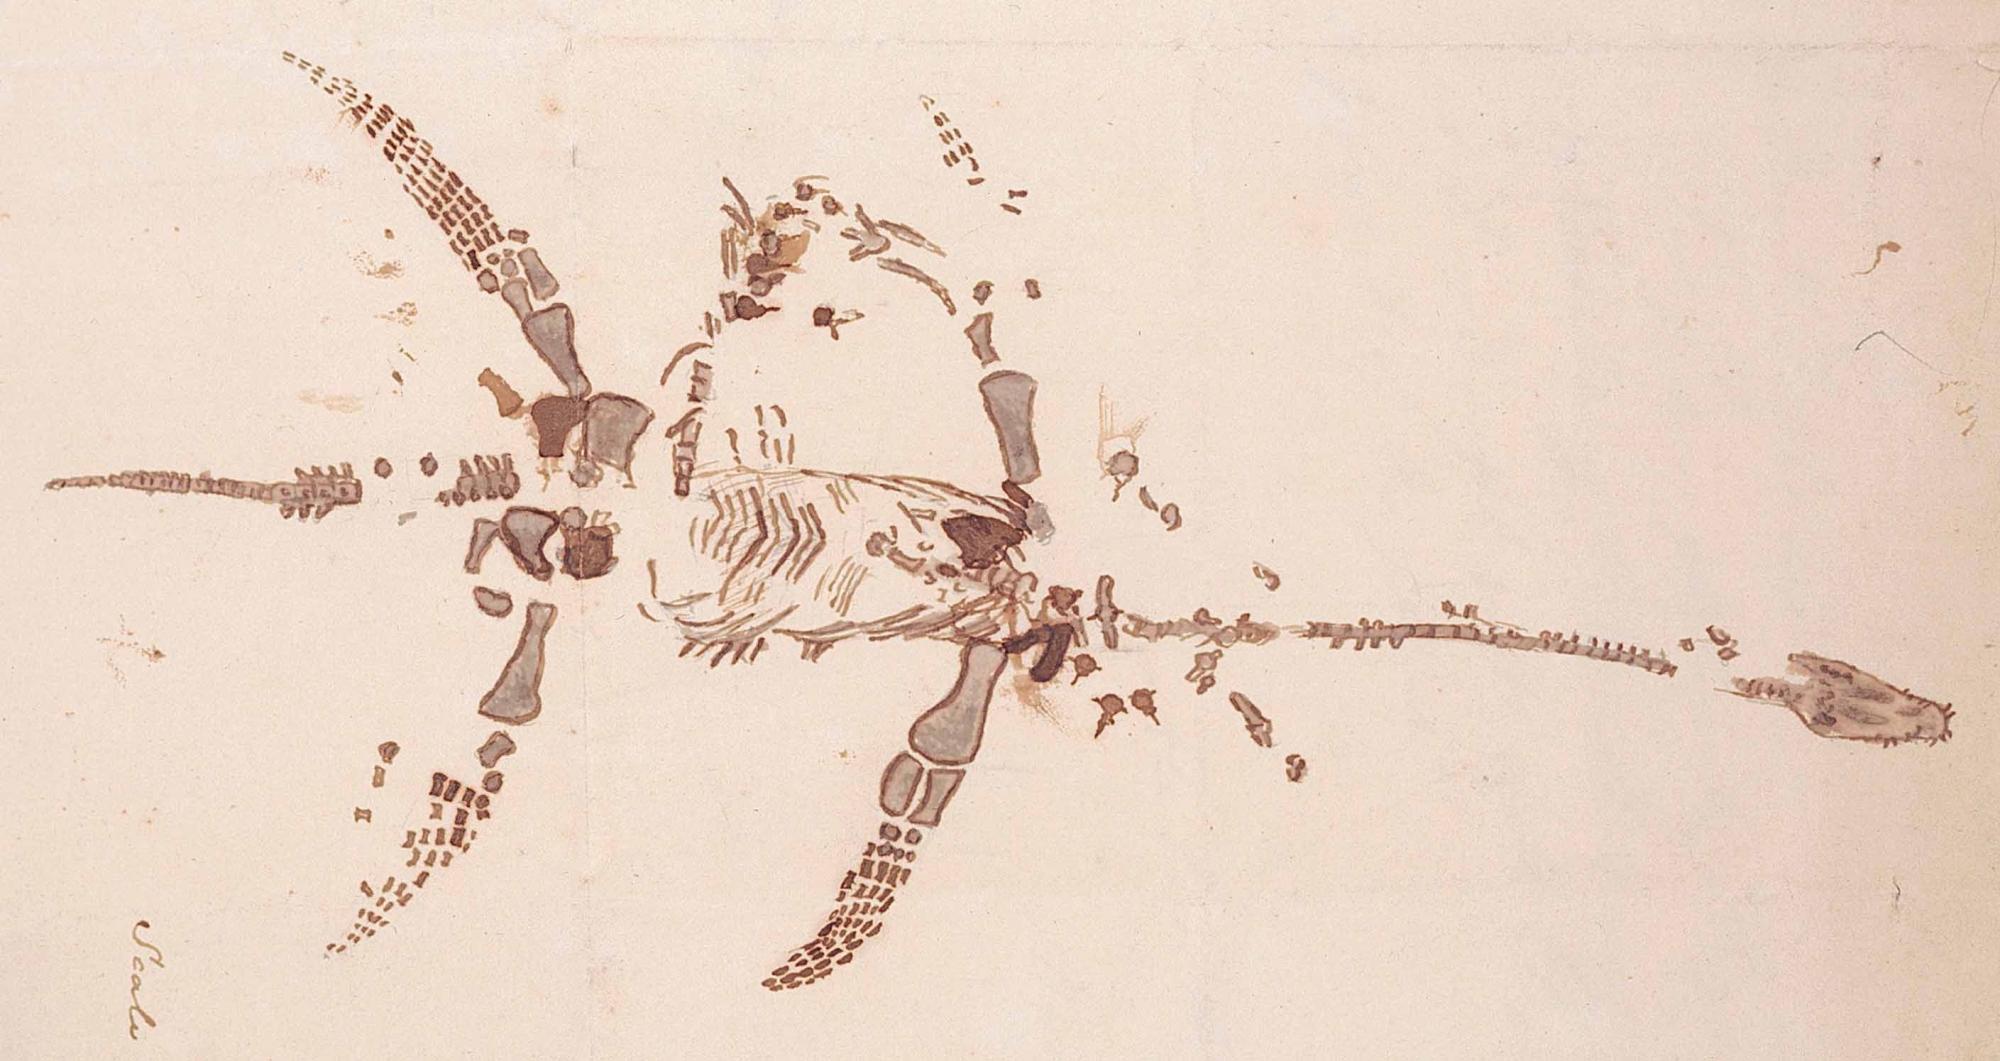 Sketch of plesiosaurus, in a letter from Mary Anning. Wellcome Collection.